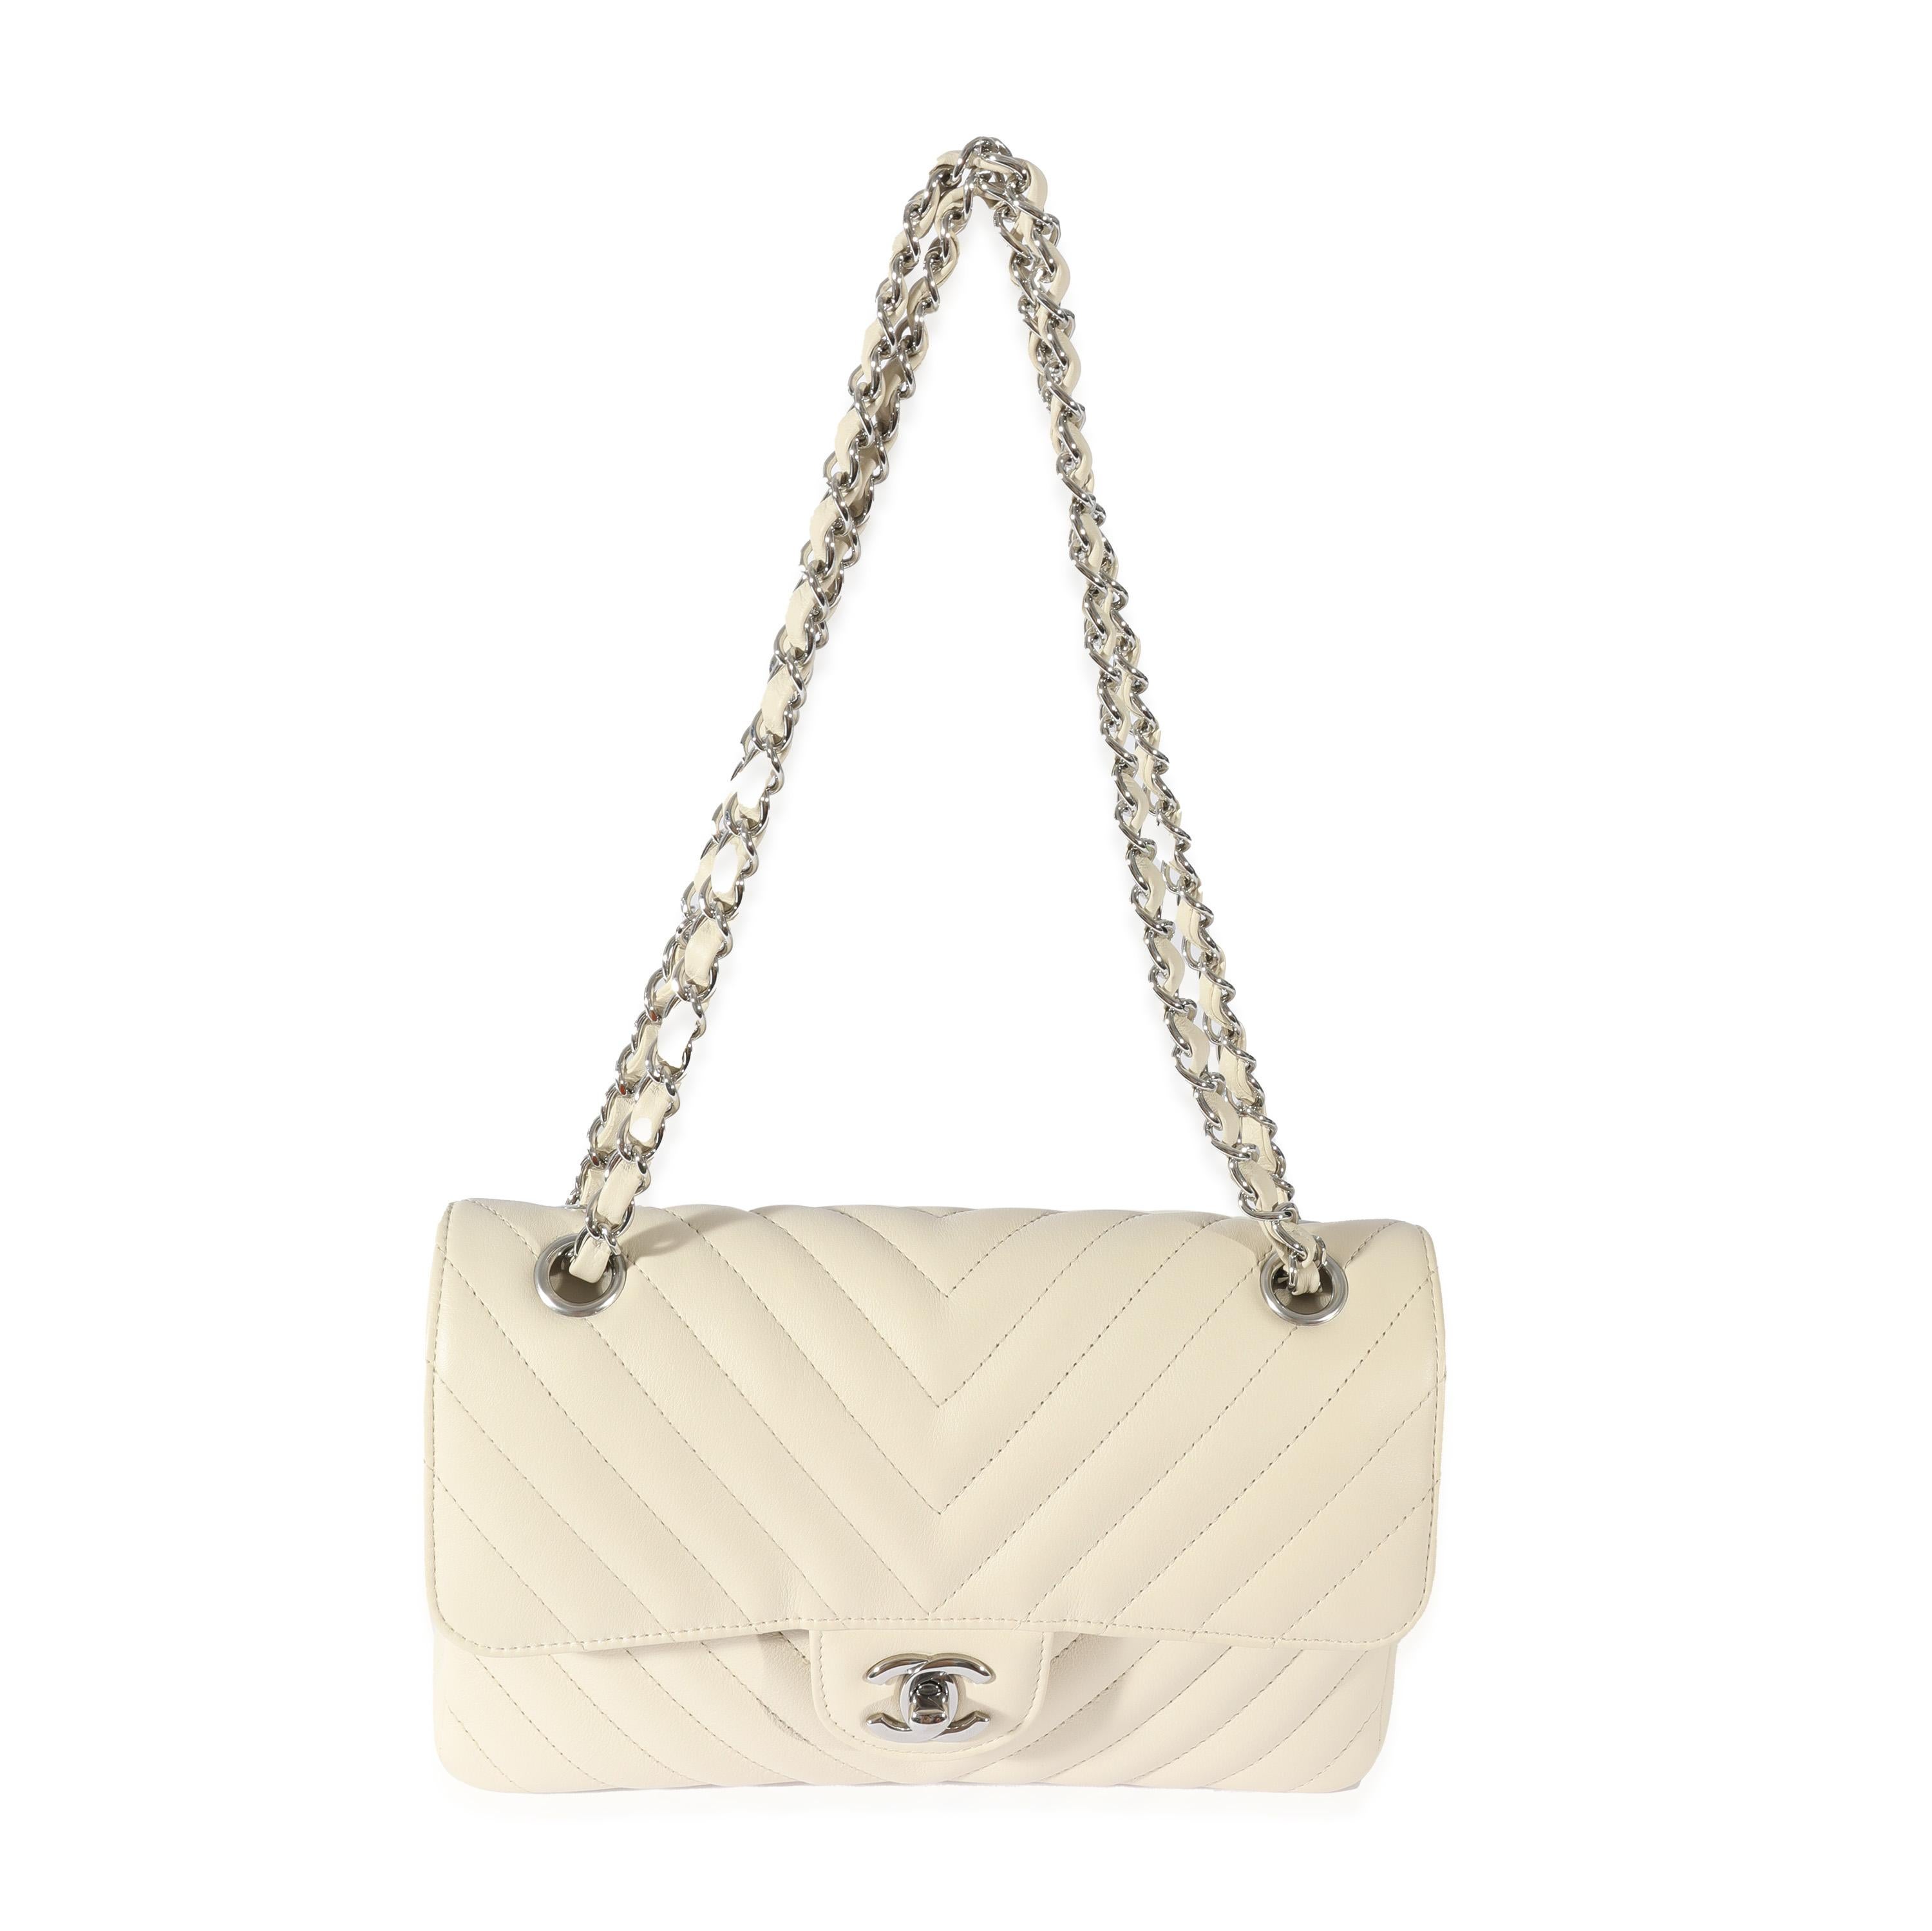 Listing Title: Chanel Neutral Chevron Quilted Leather Small Classic Flap
 SKU: 128515
 MSRP: 8800.00
 Condition: Pre-owned 
 Condition Description: A timeless classic that never goes out of style, the flap bag from Chanel dates back to 1955 and has